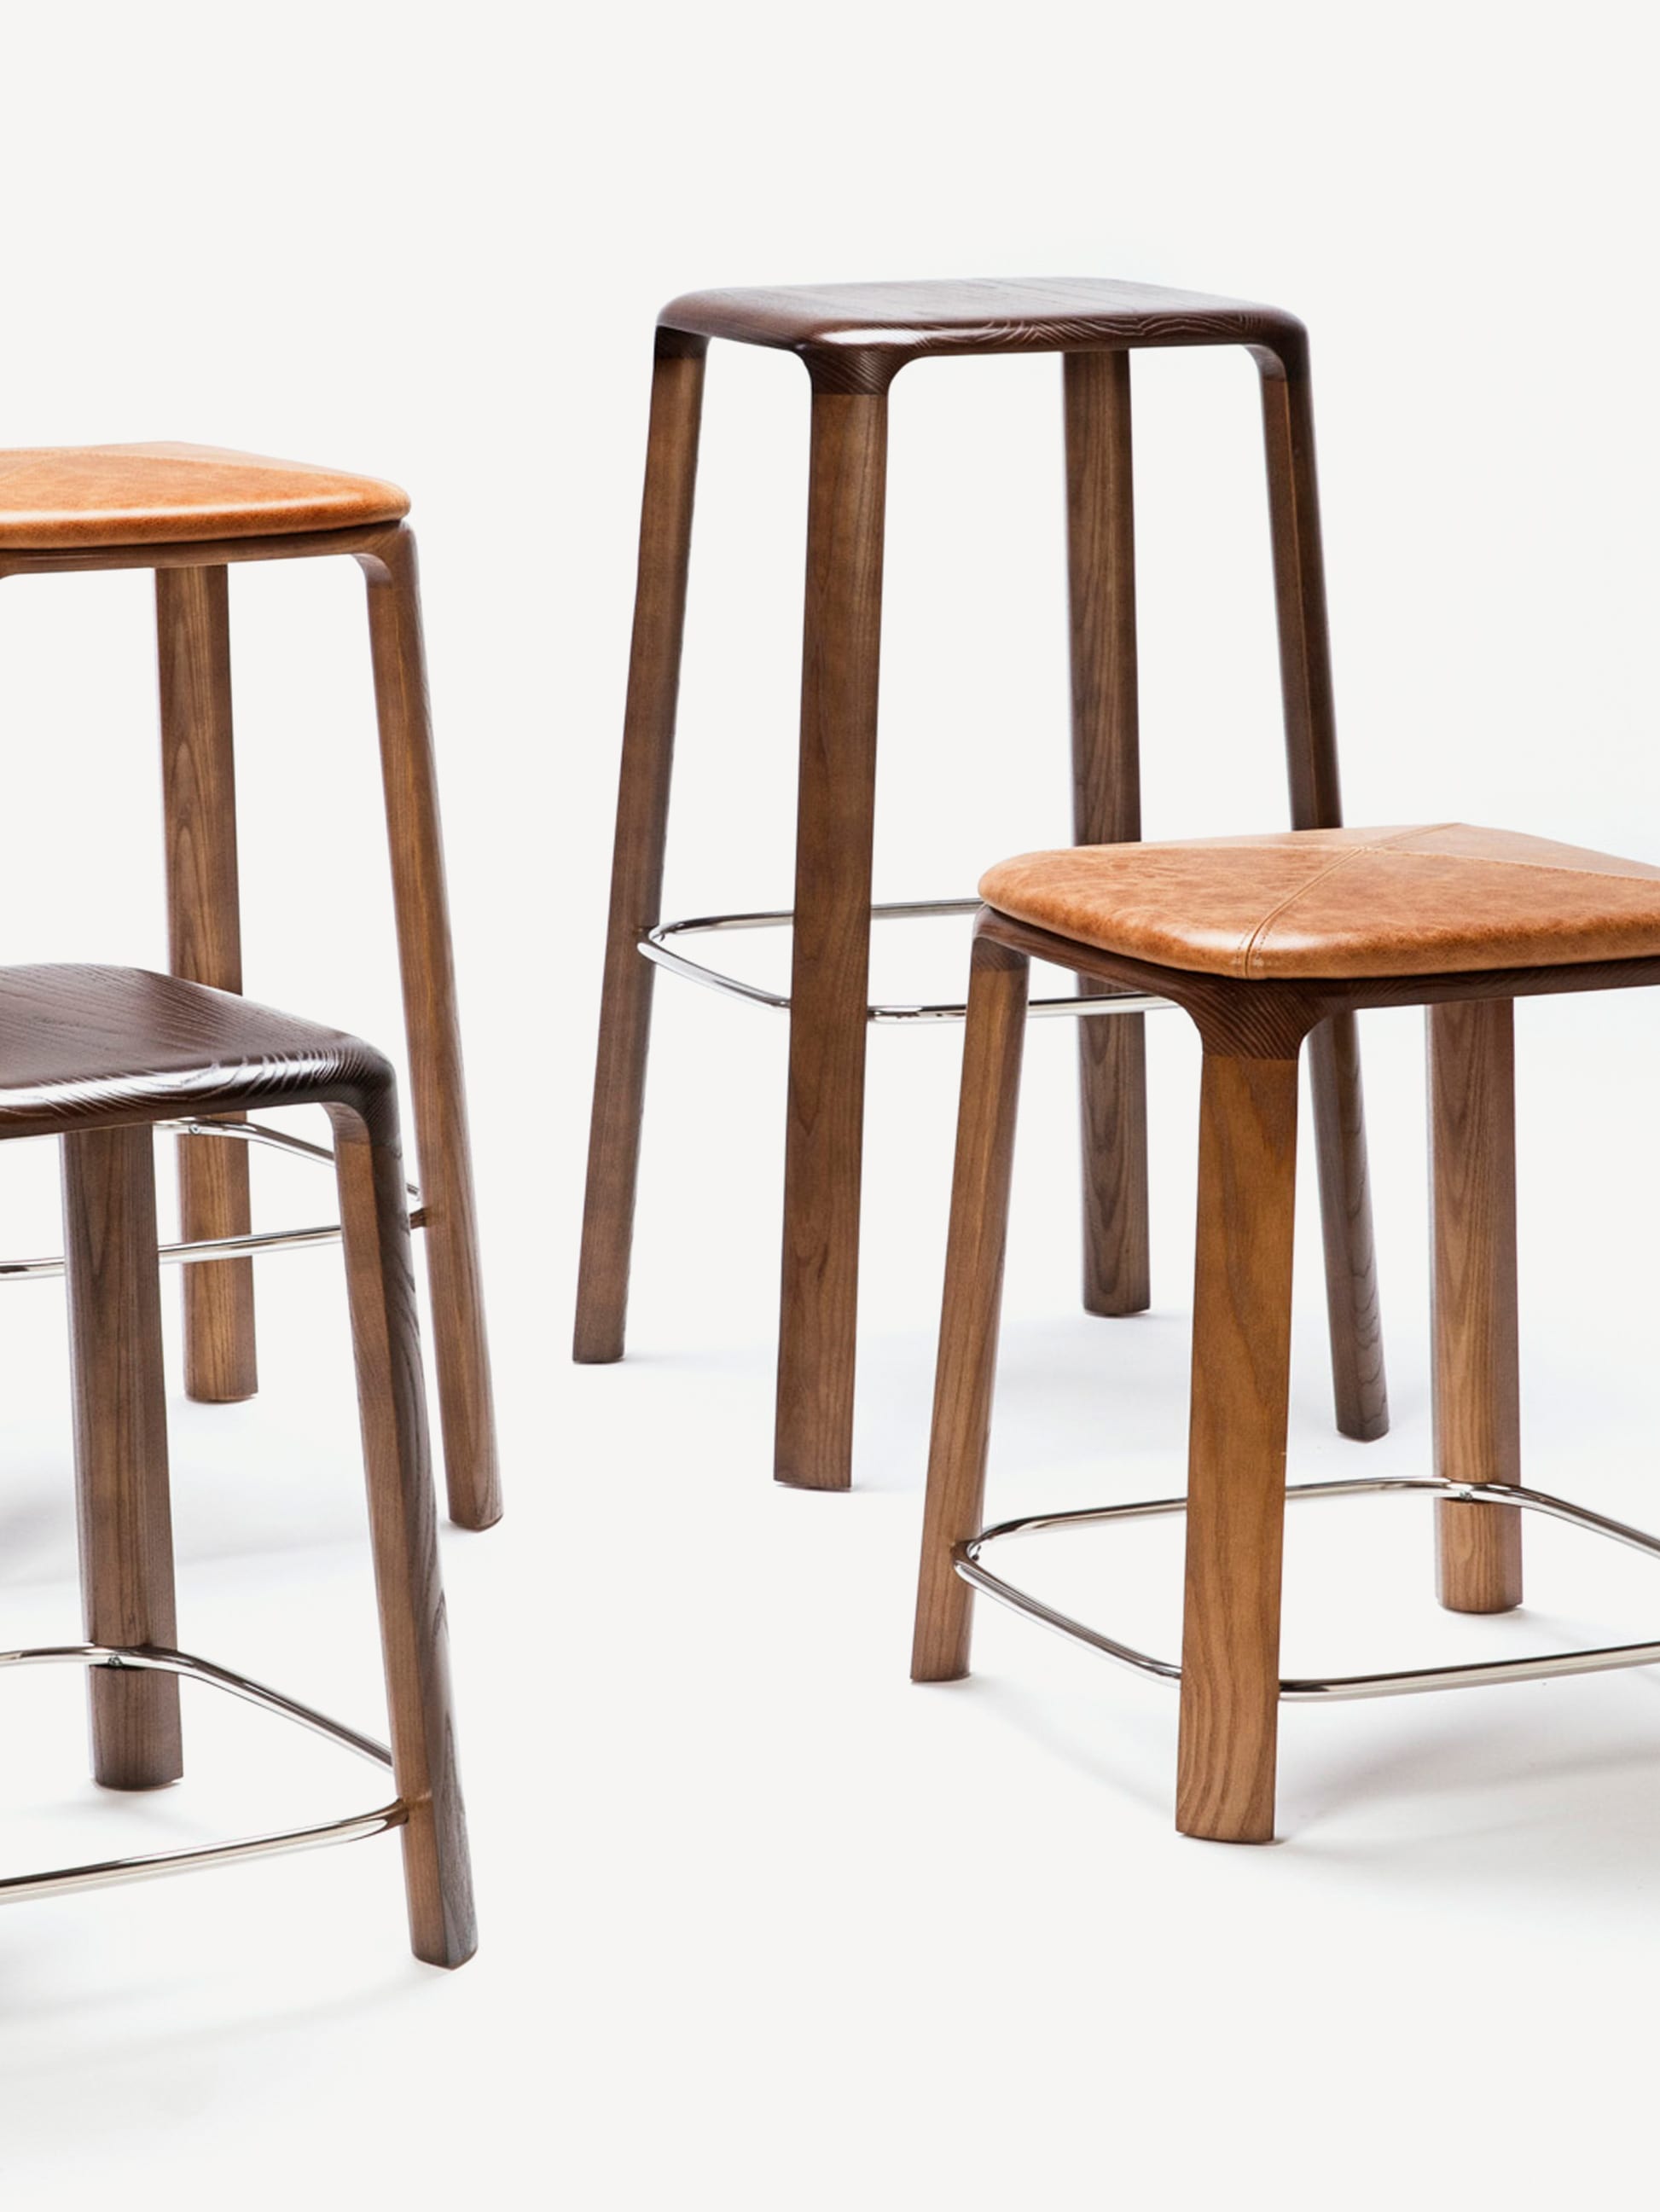 Array of Gunlocke Trilla stools in counter height, bar height and standard height.